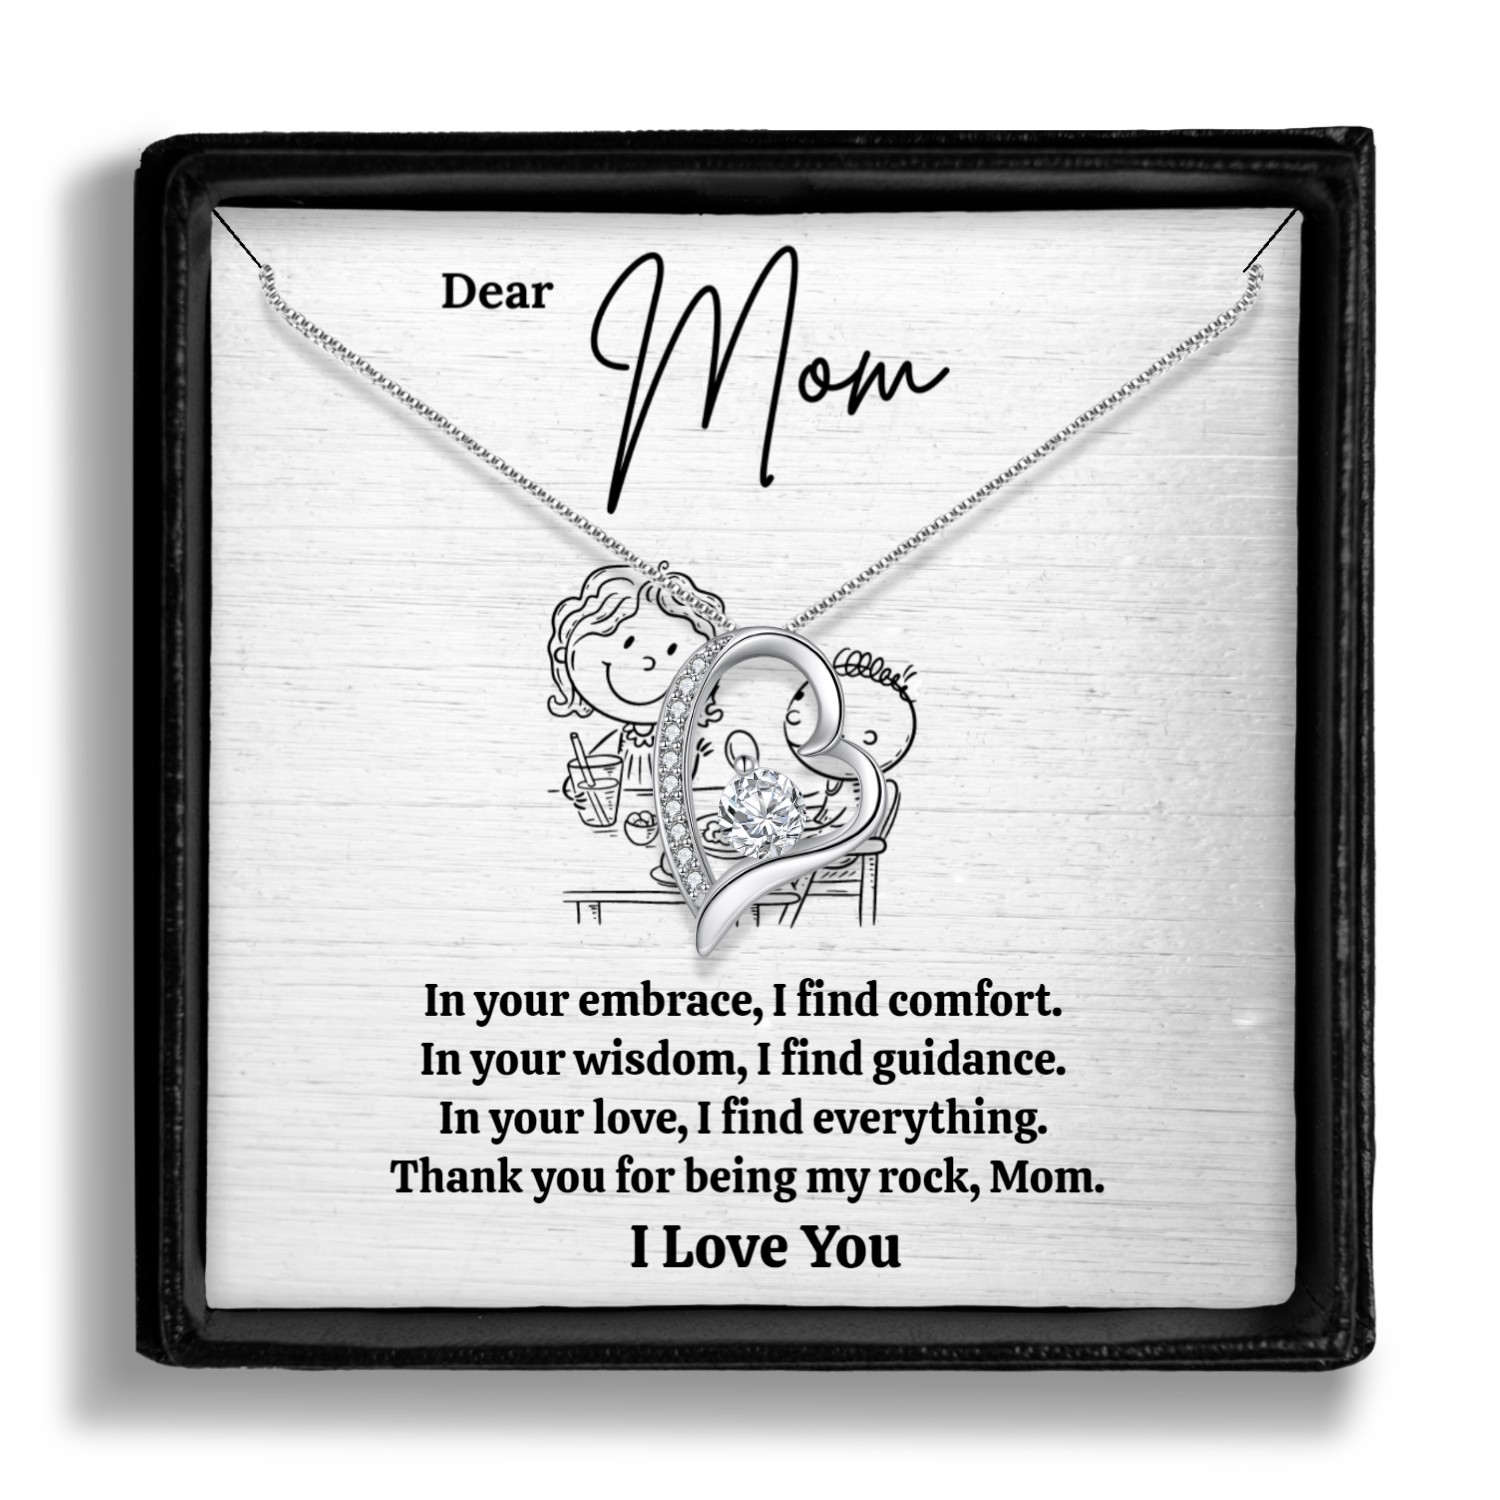 Personalized Necklaces + Message Cards - Mom Eternal Heart Necklace 